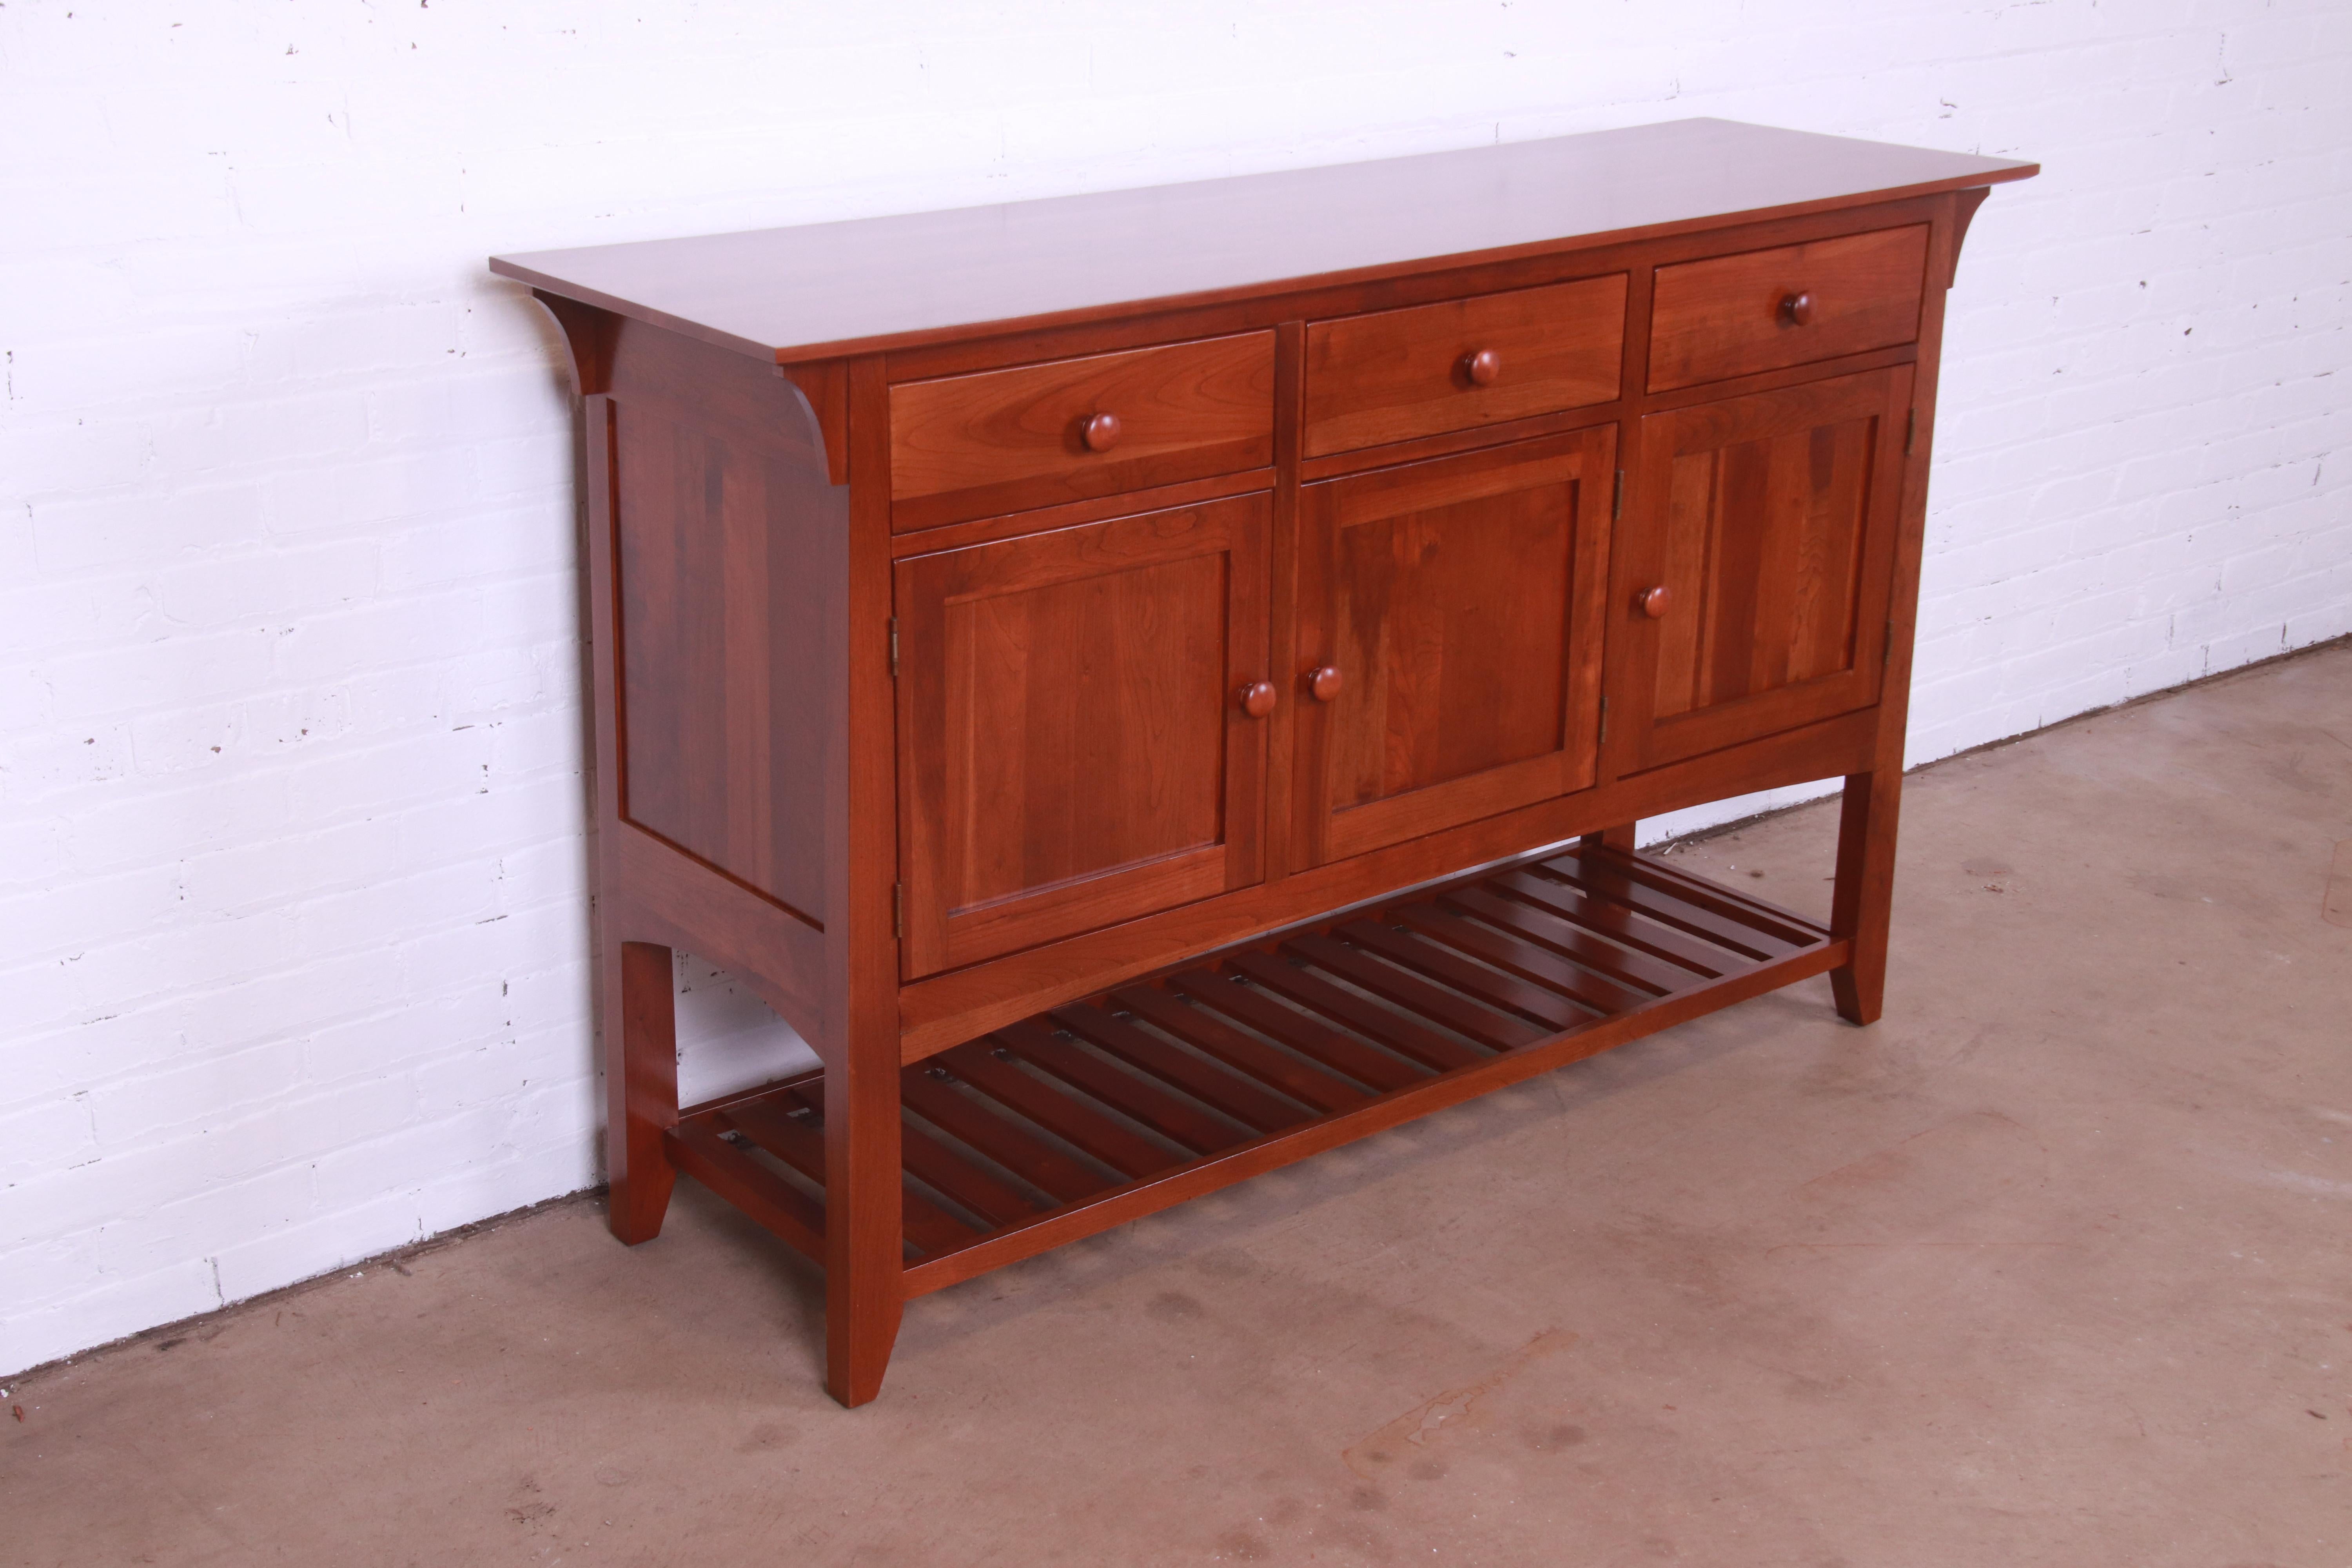 Arts and Crafts Ethan Allen Arts & Crafts Cherry Wood Sideboard or Bar Cabinet, Newly Refinished